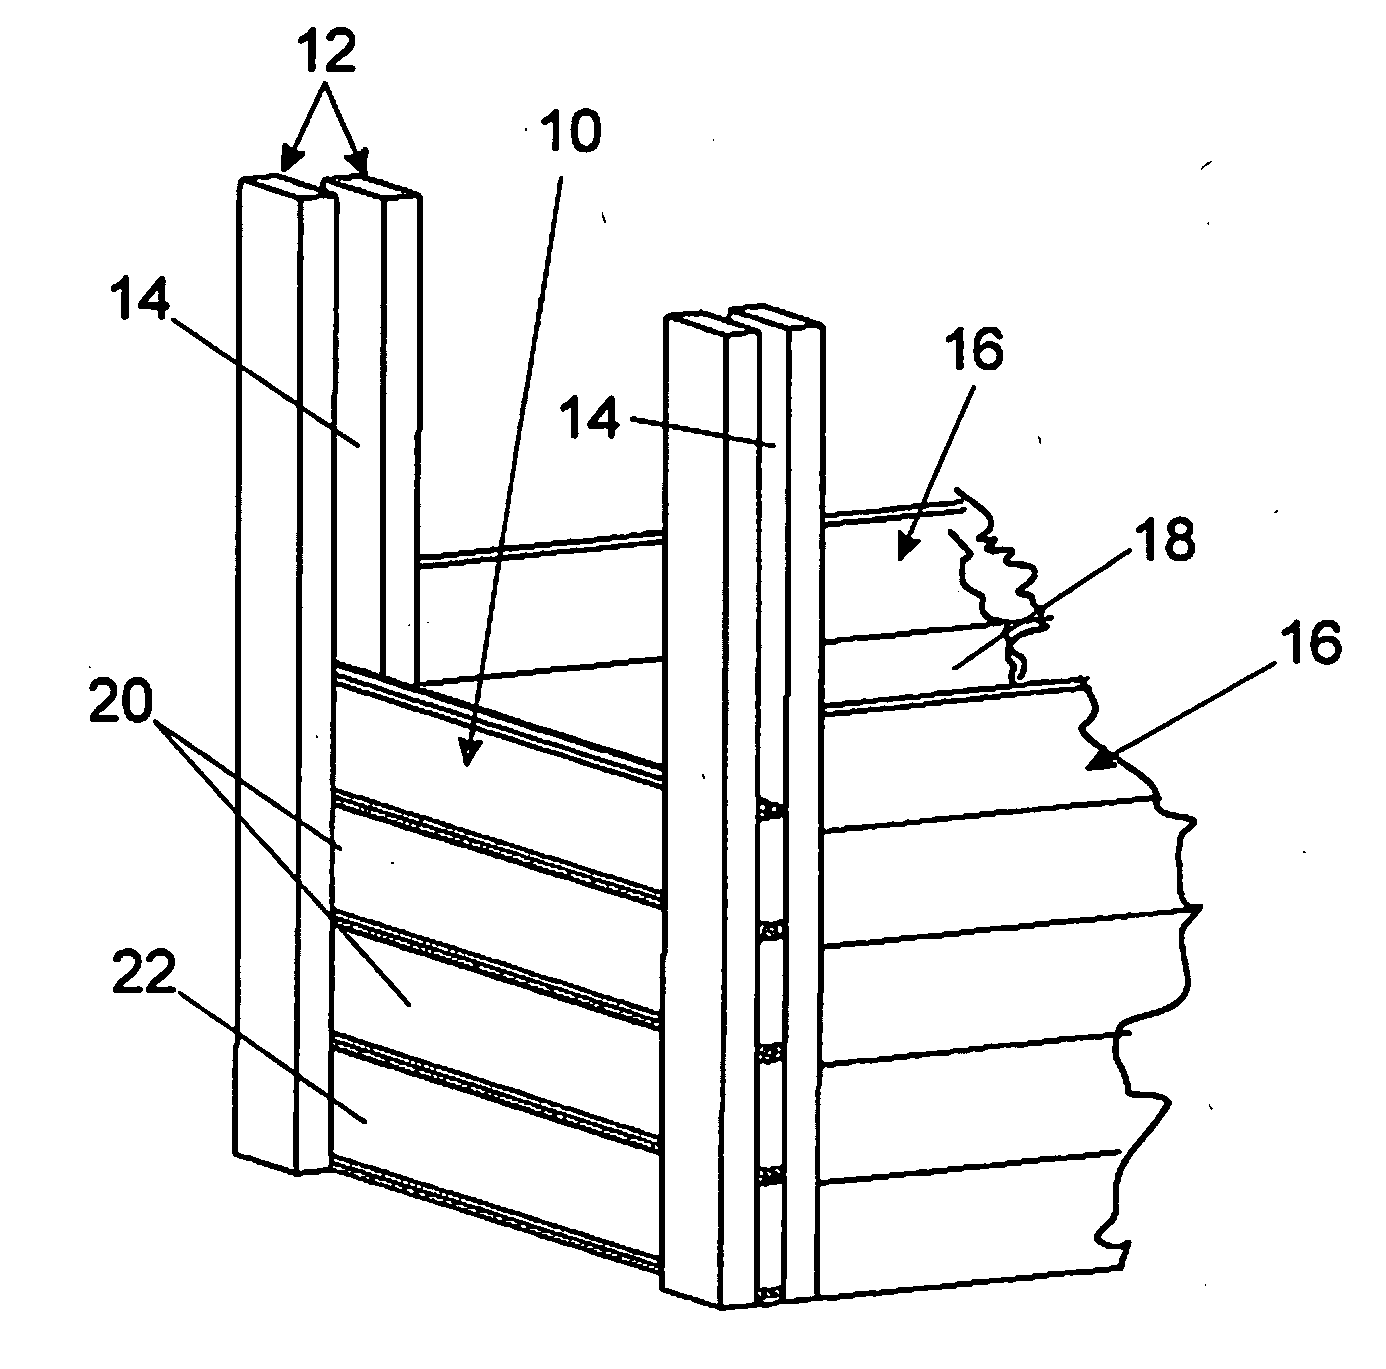 Sealing system for a water flow control gate